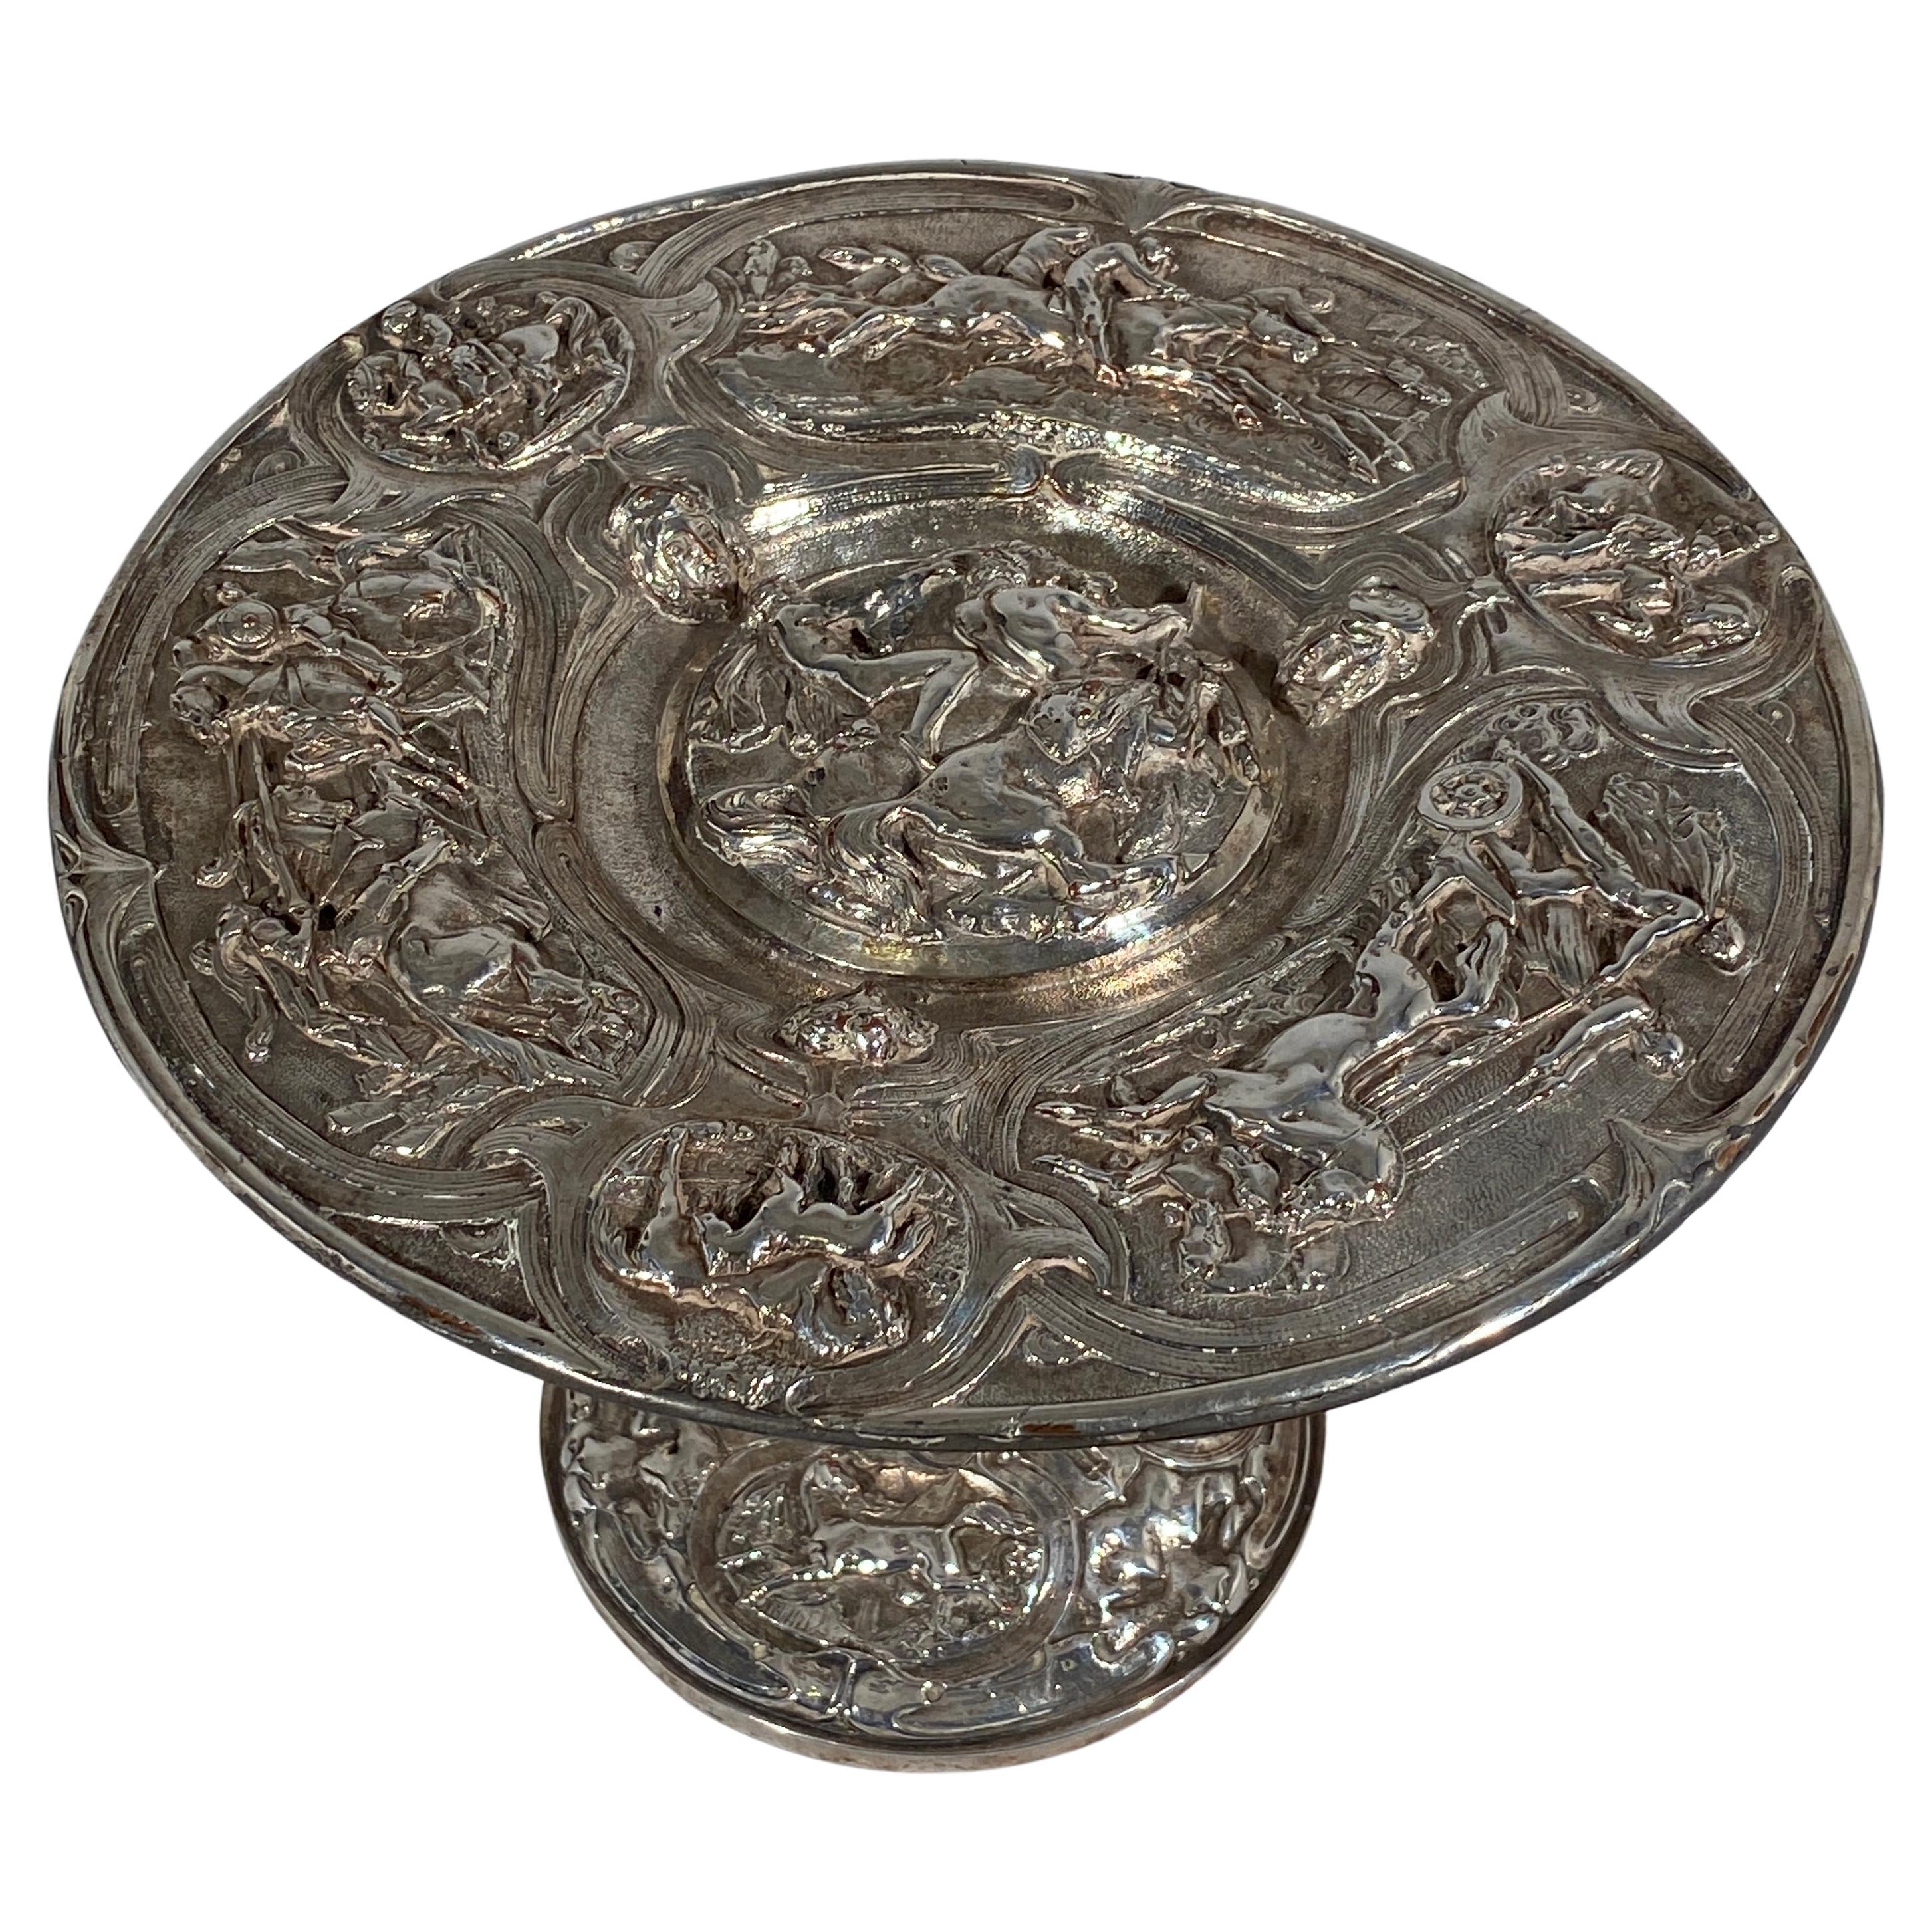 Silver Plated Trophy Dish Tazza with Gladiatorial and Horse Racing Scene

Minor flaking with dark tarnishing in areas. 

